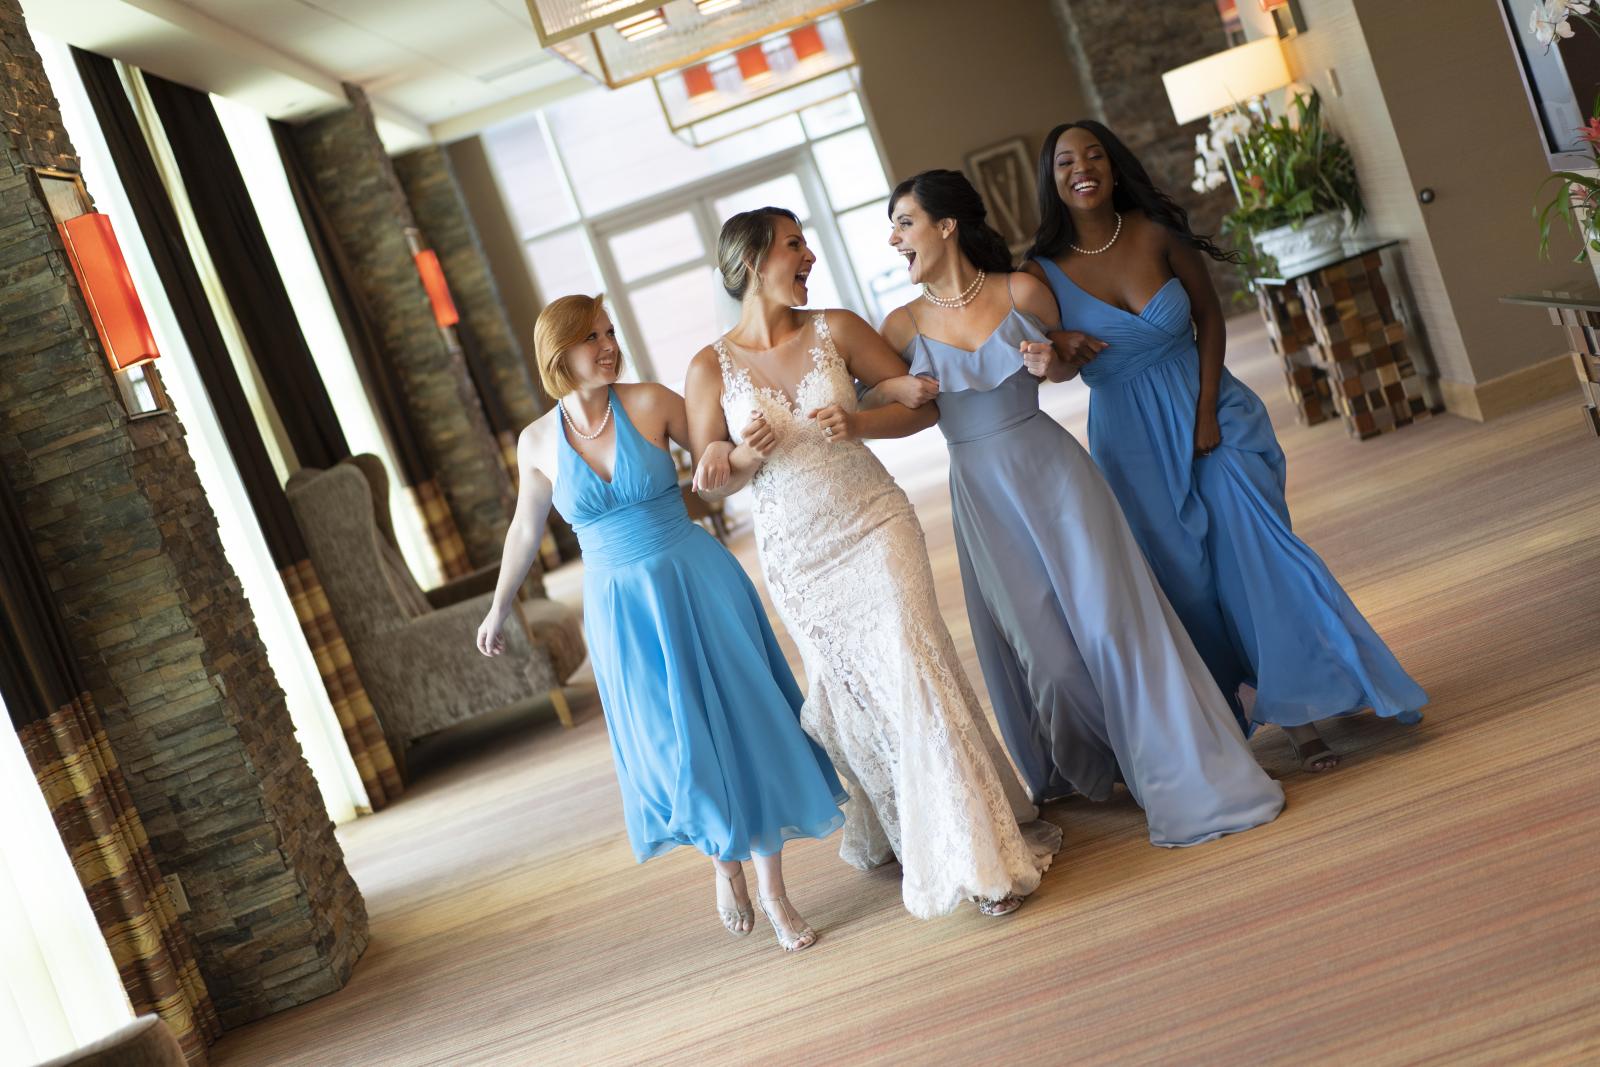 A bride and three bridesmaids strolling down a hallway with their arms linked